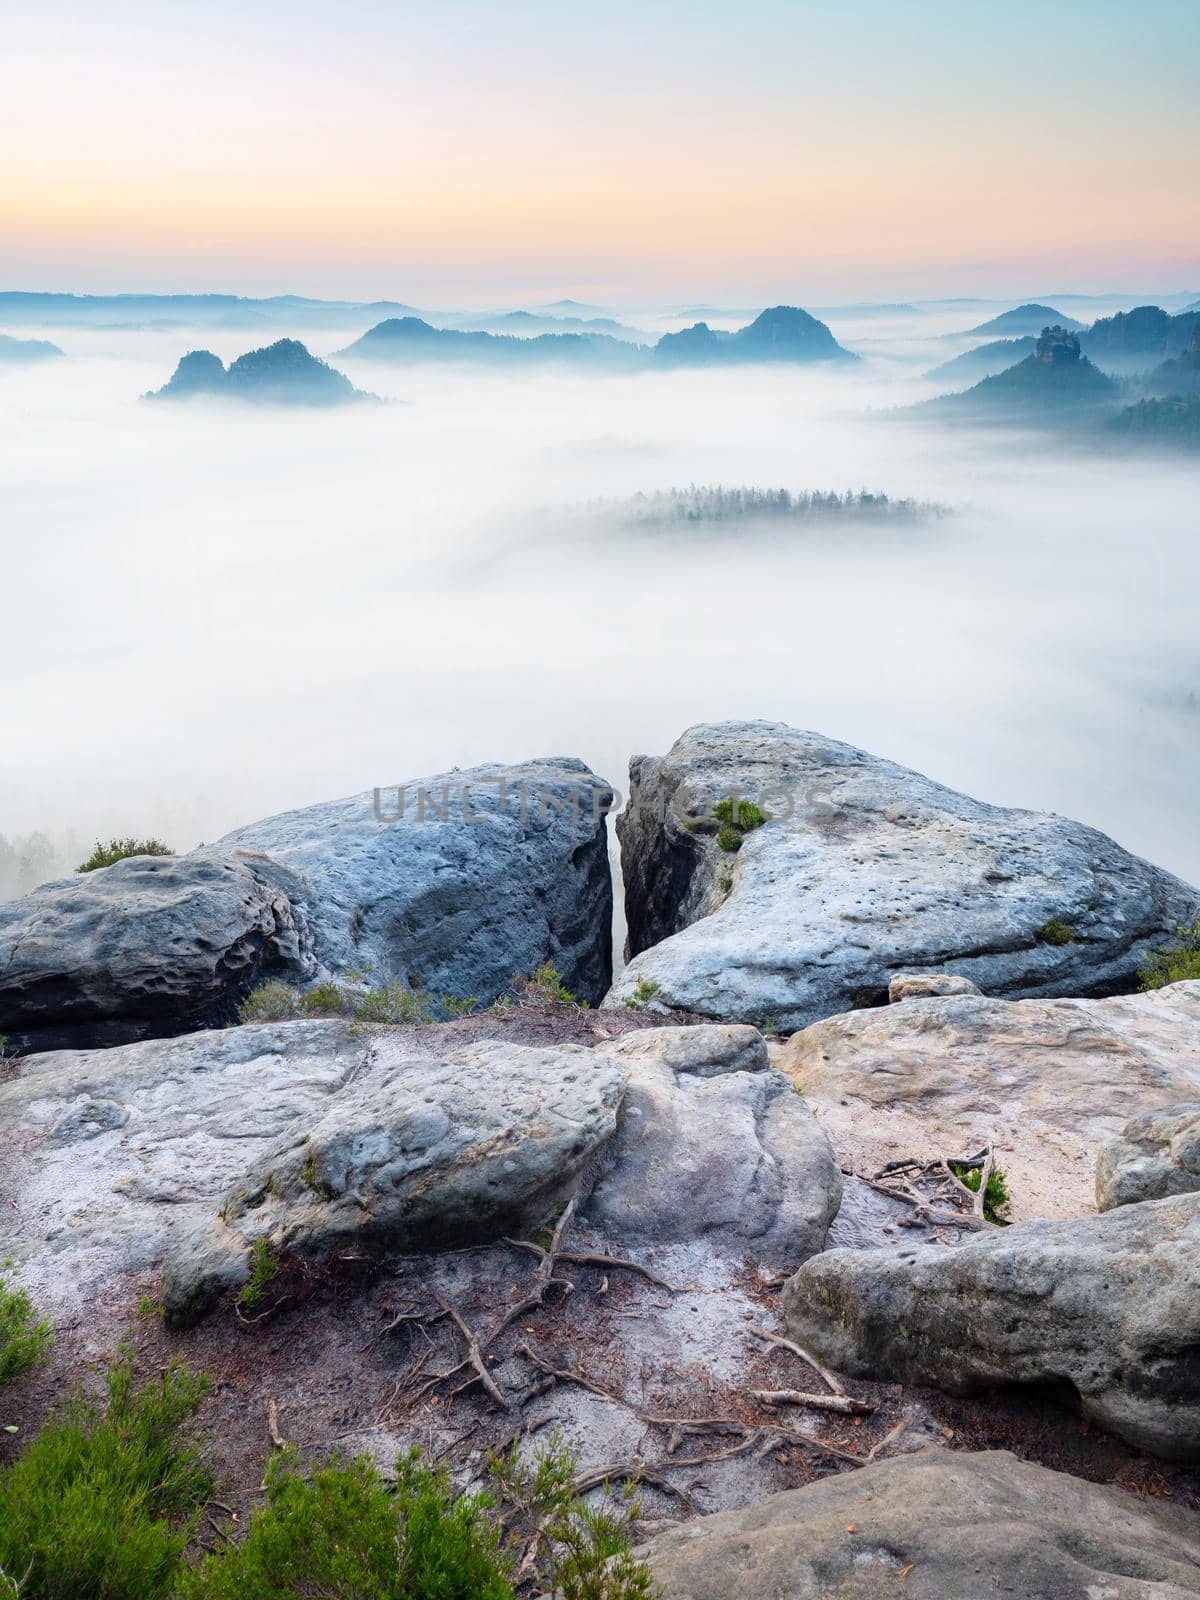 Wake up of misty sandstone mountains with the gradation of creamy clouds by rdonar2